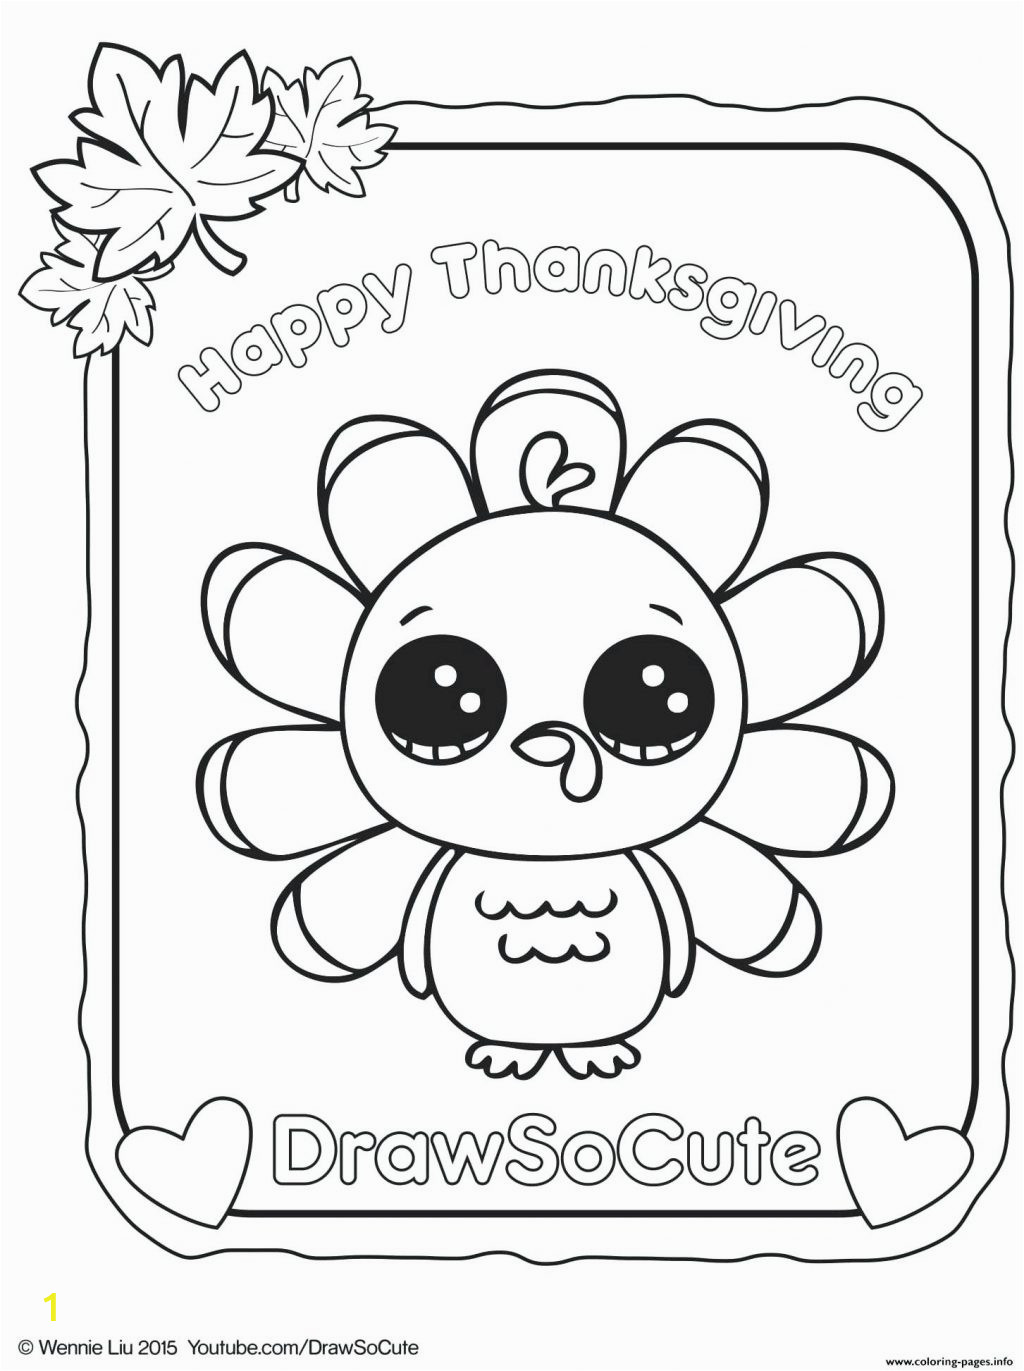 Easy Preschool Coloring Pages top 51 Hunky Dory Thanksgiving Coloring Pages to Print Out